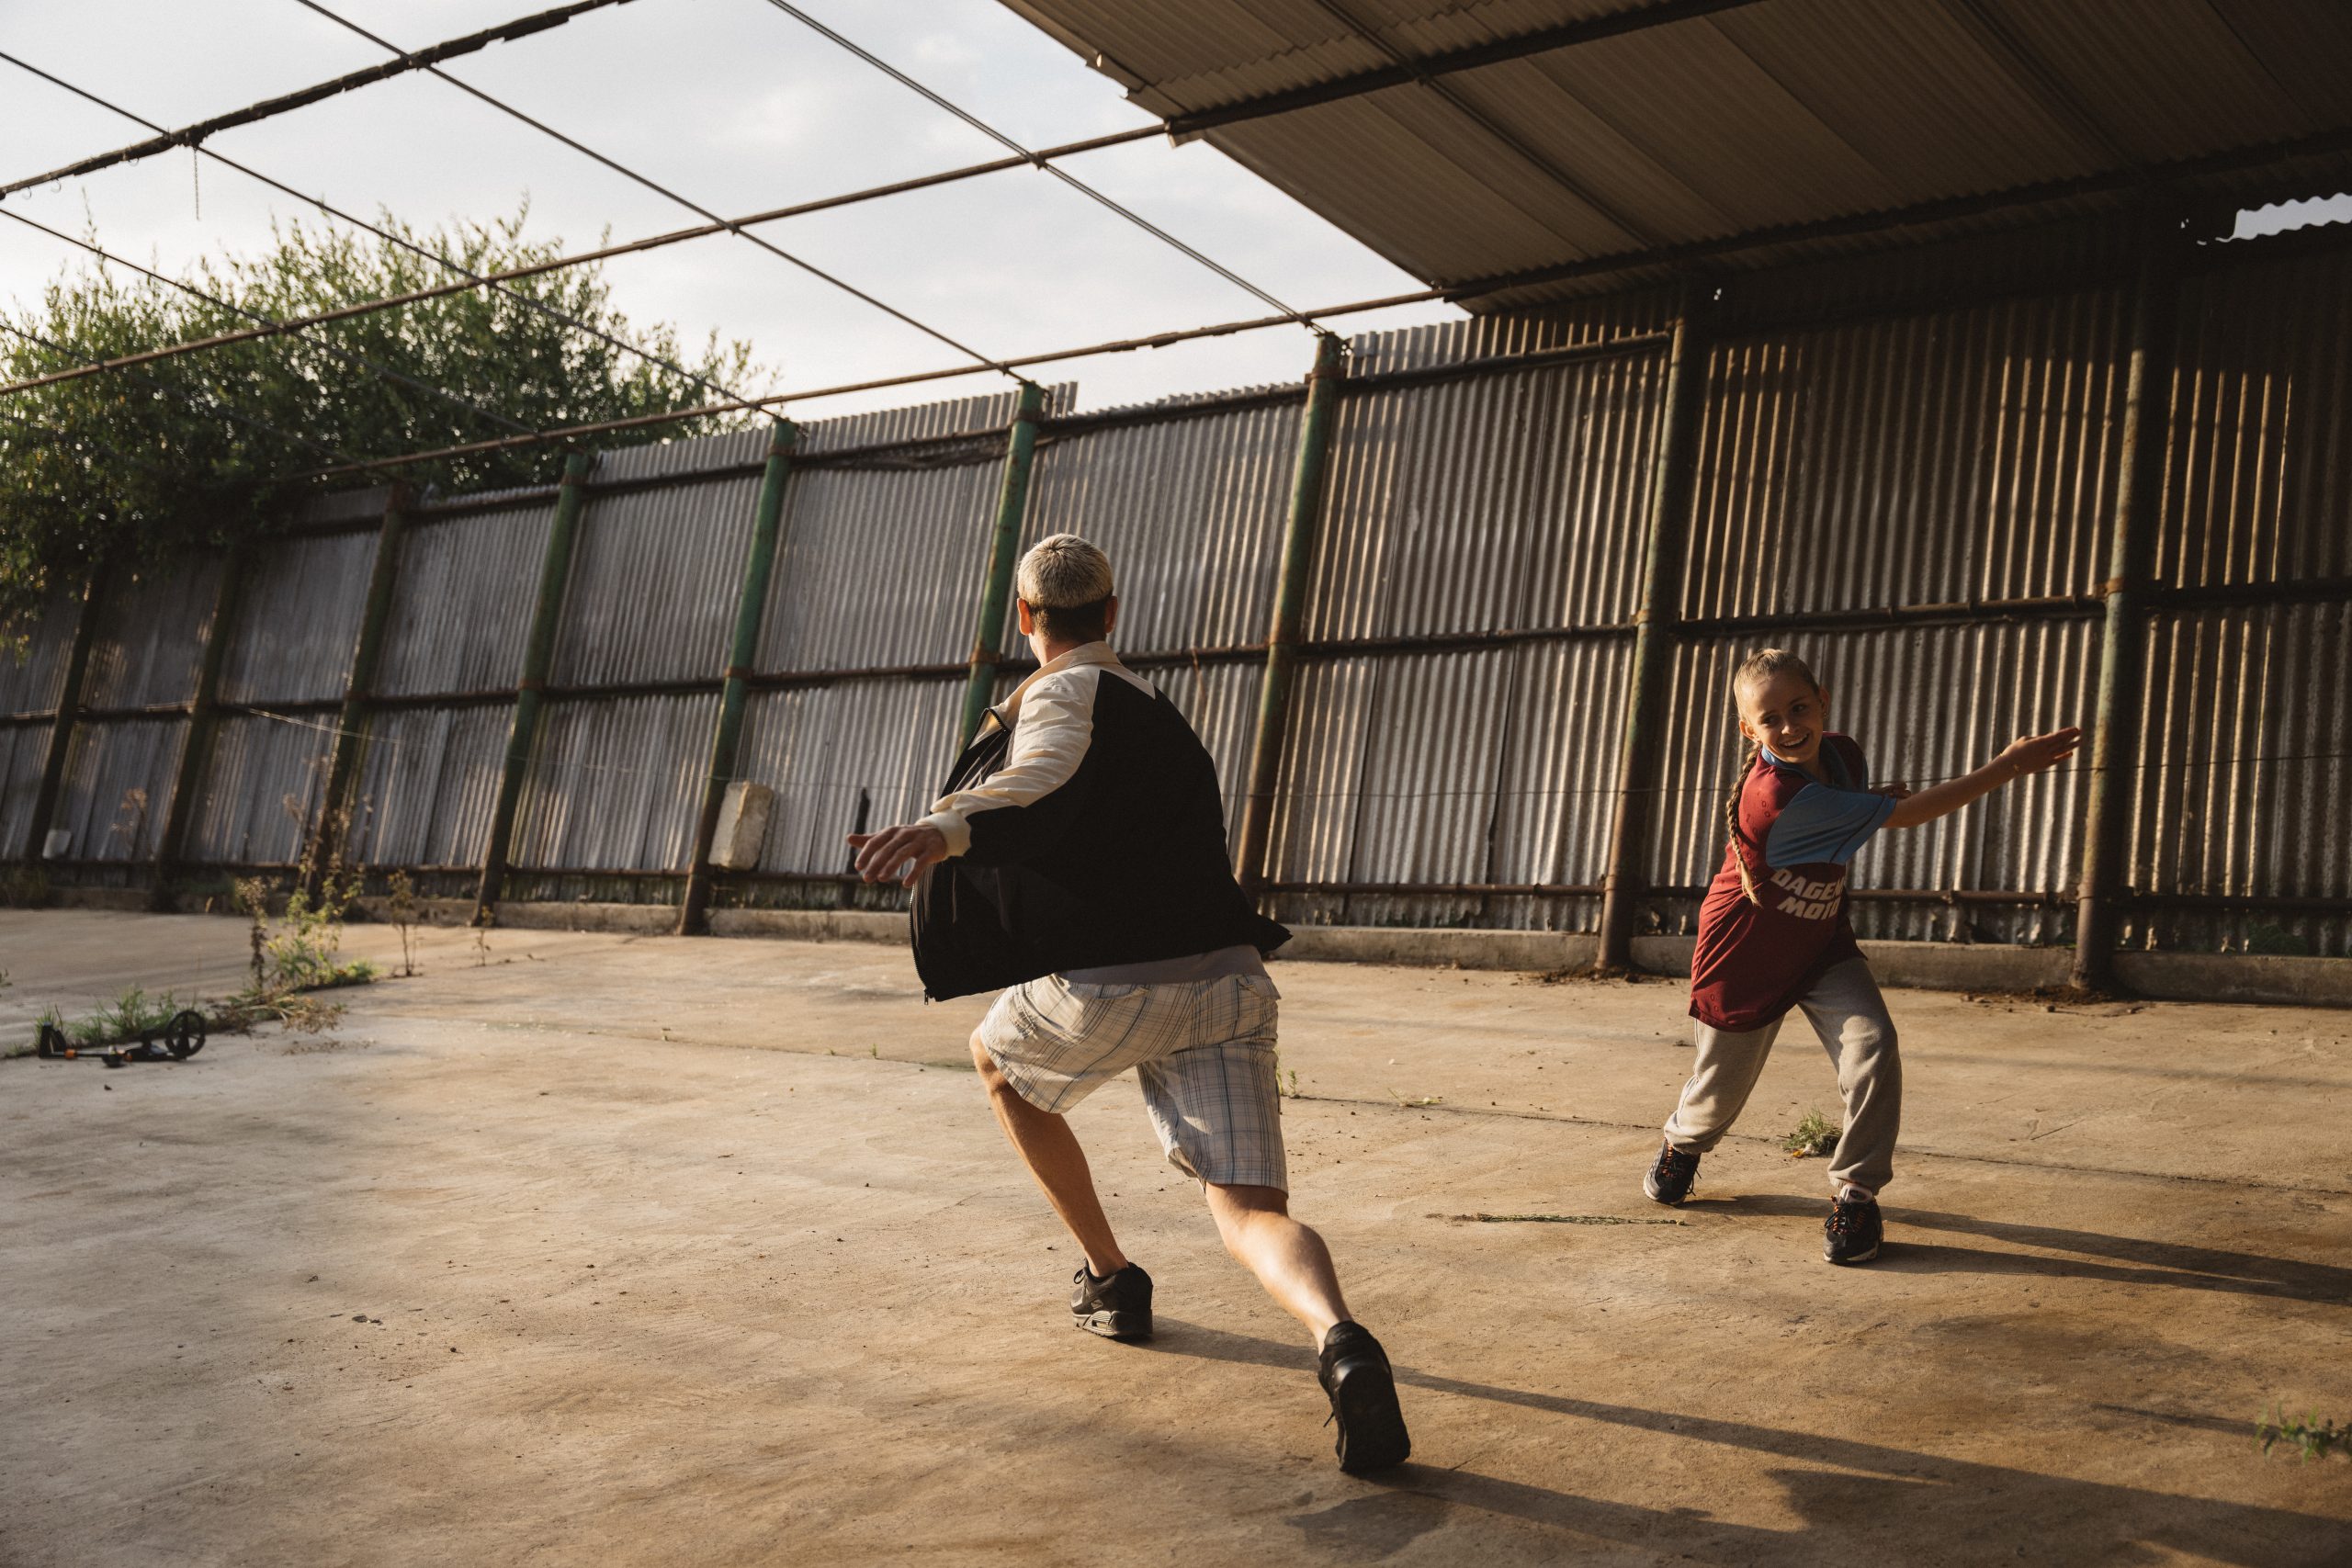 Image of a rather and daughter running around playfully in an area with a concrete floor, and corrugated metal walls, all bathed in a warm light.